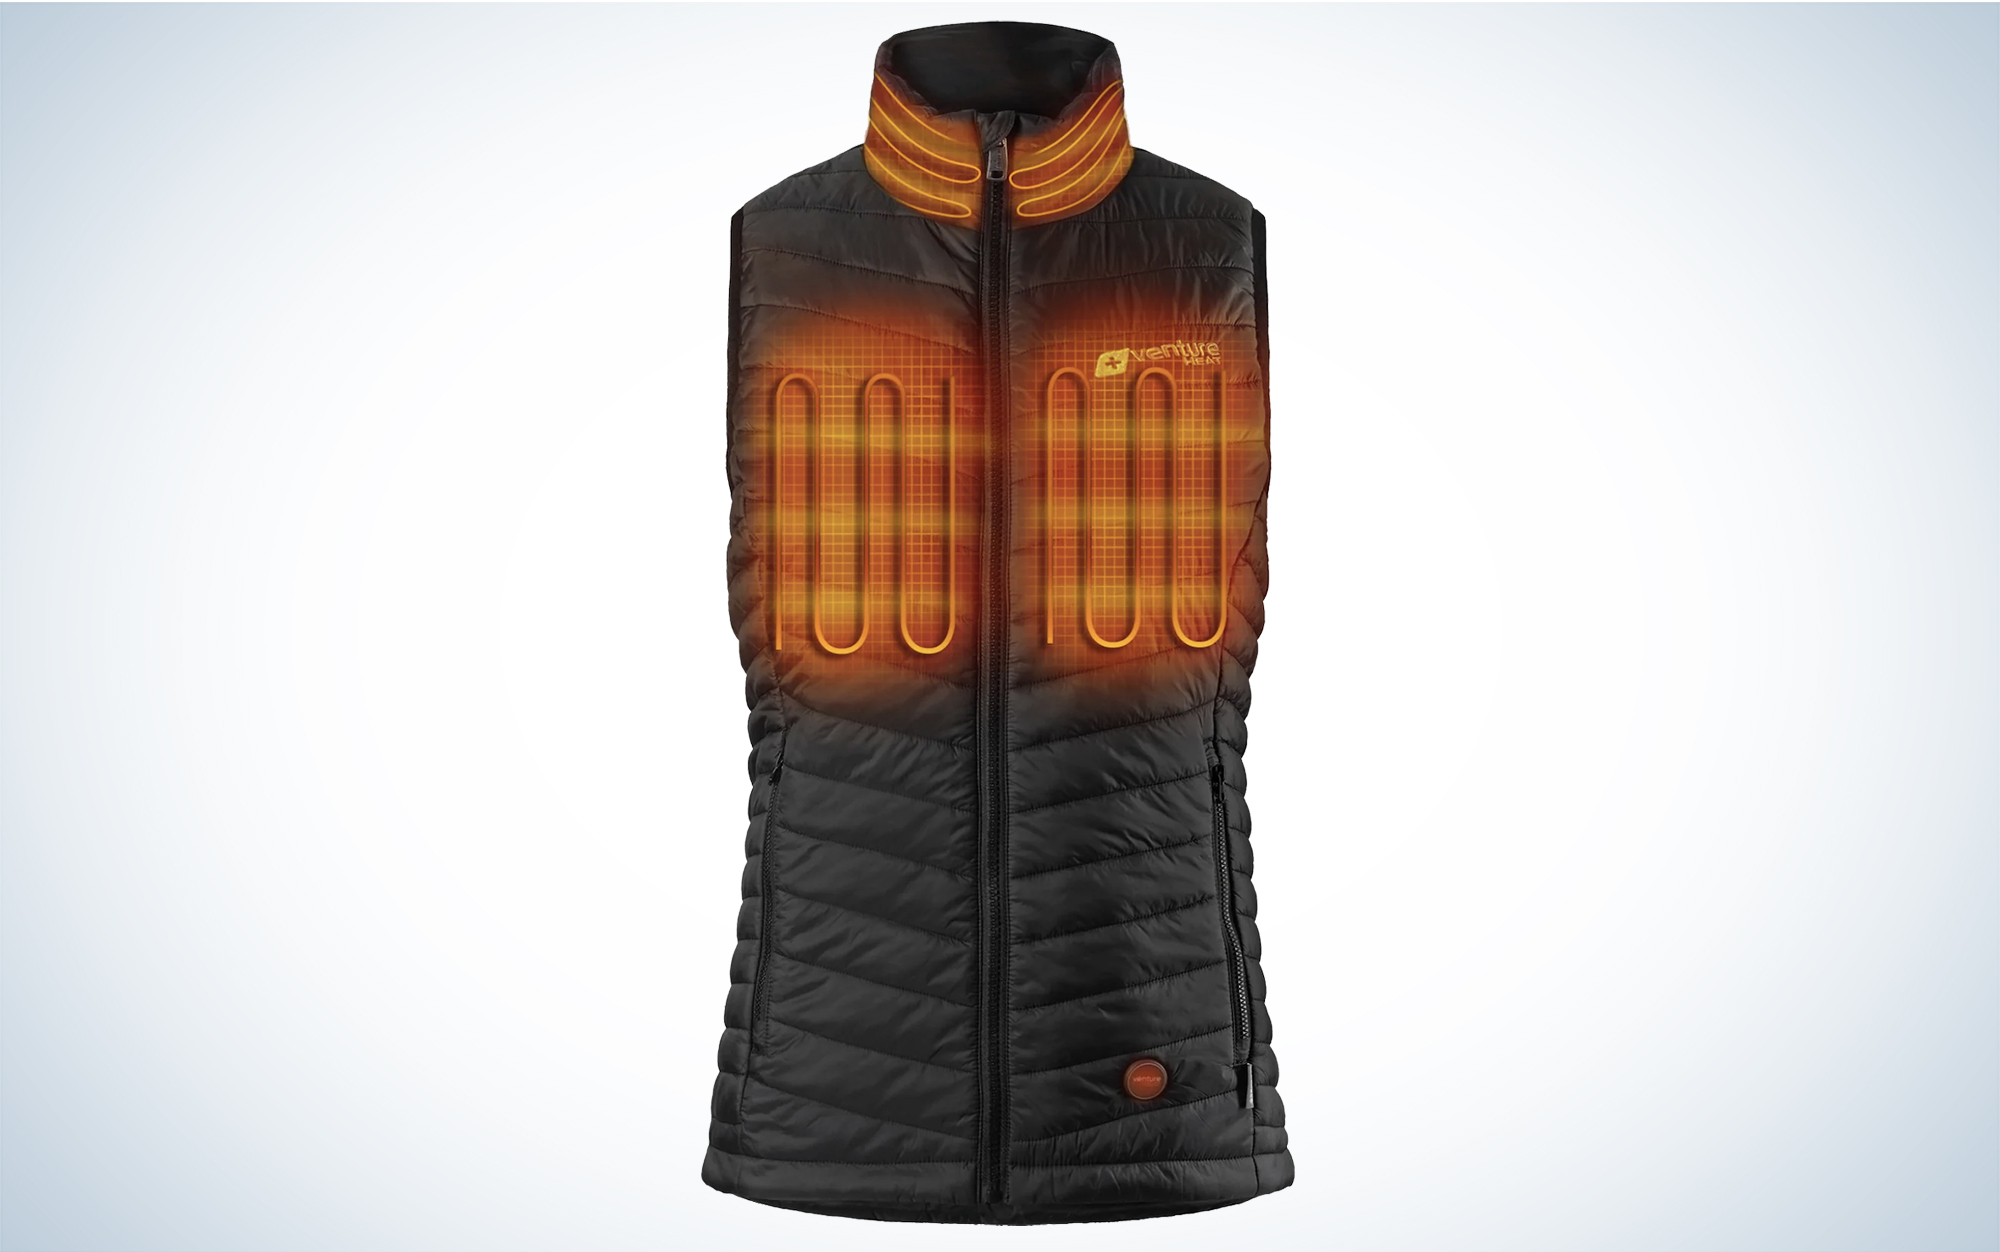 The Venture heated vest is one of the best heated vests.